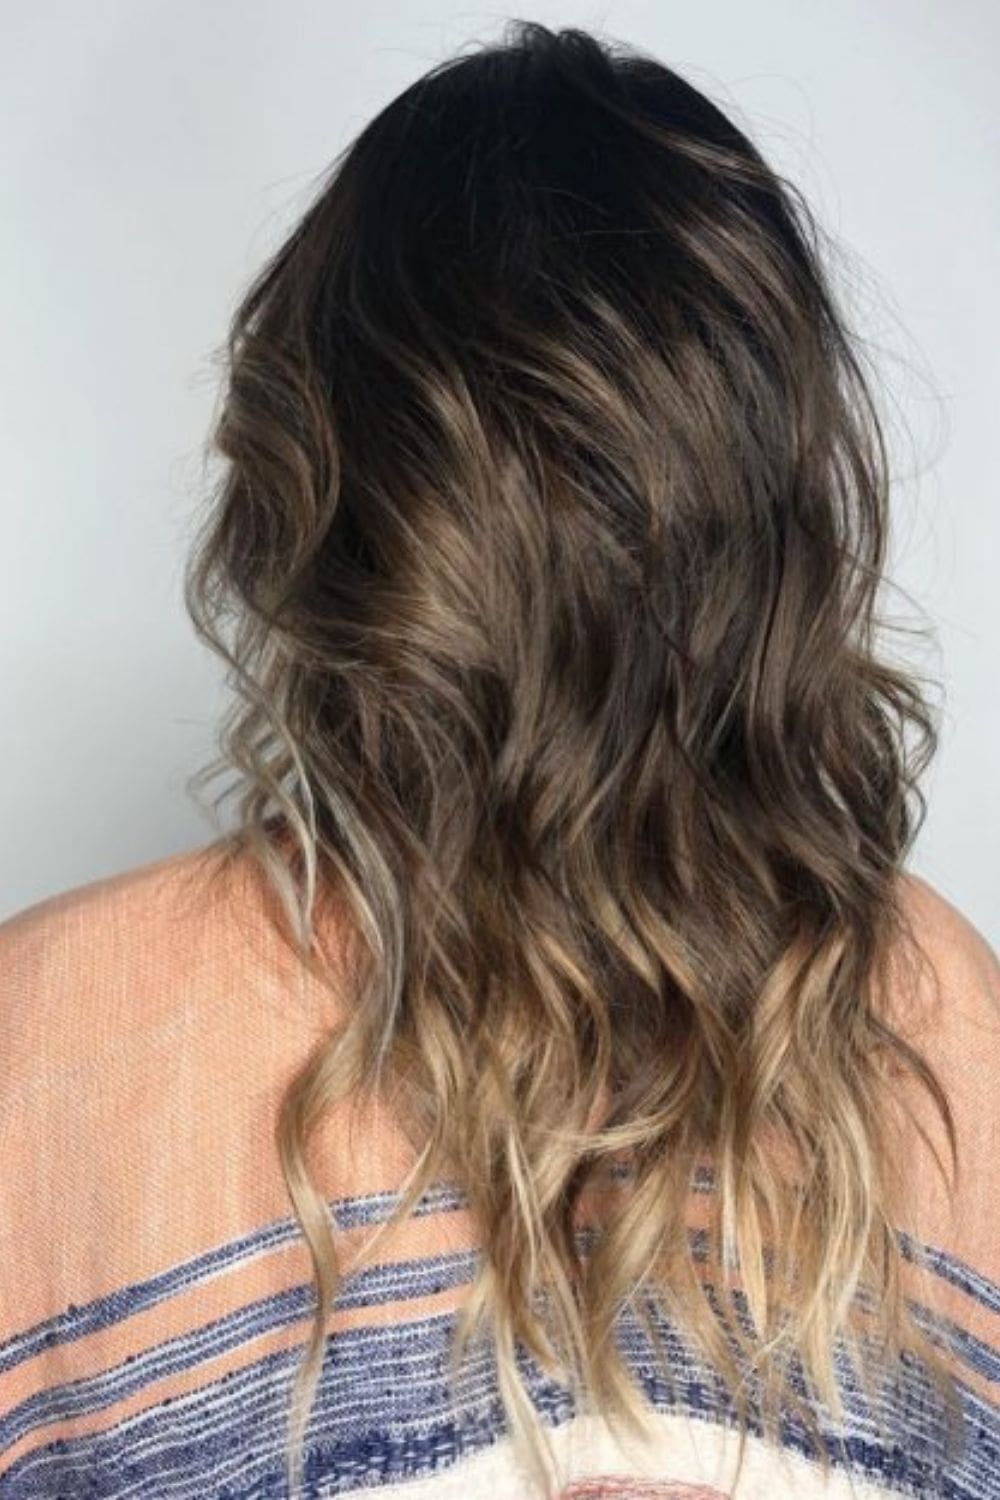 dirty blonde hair with highlights